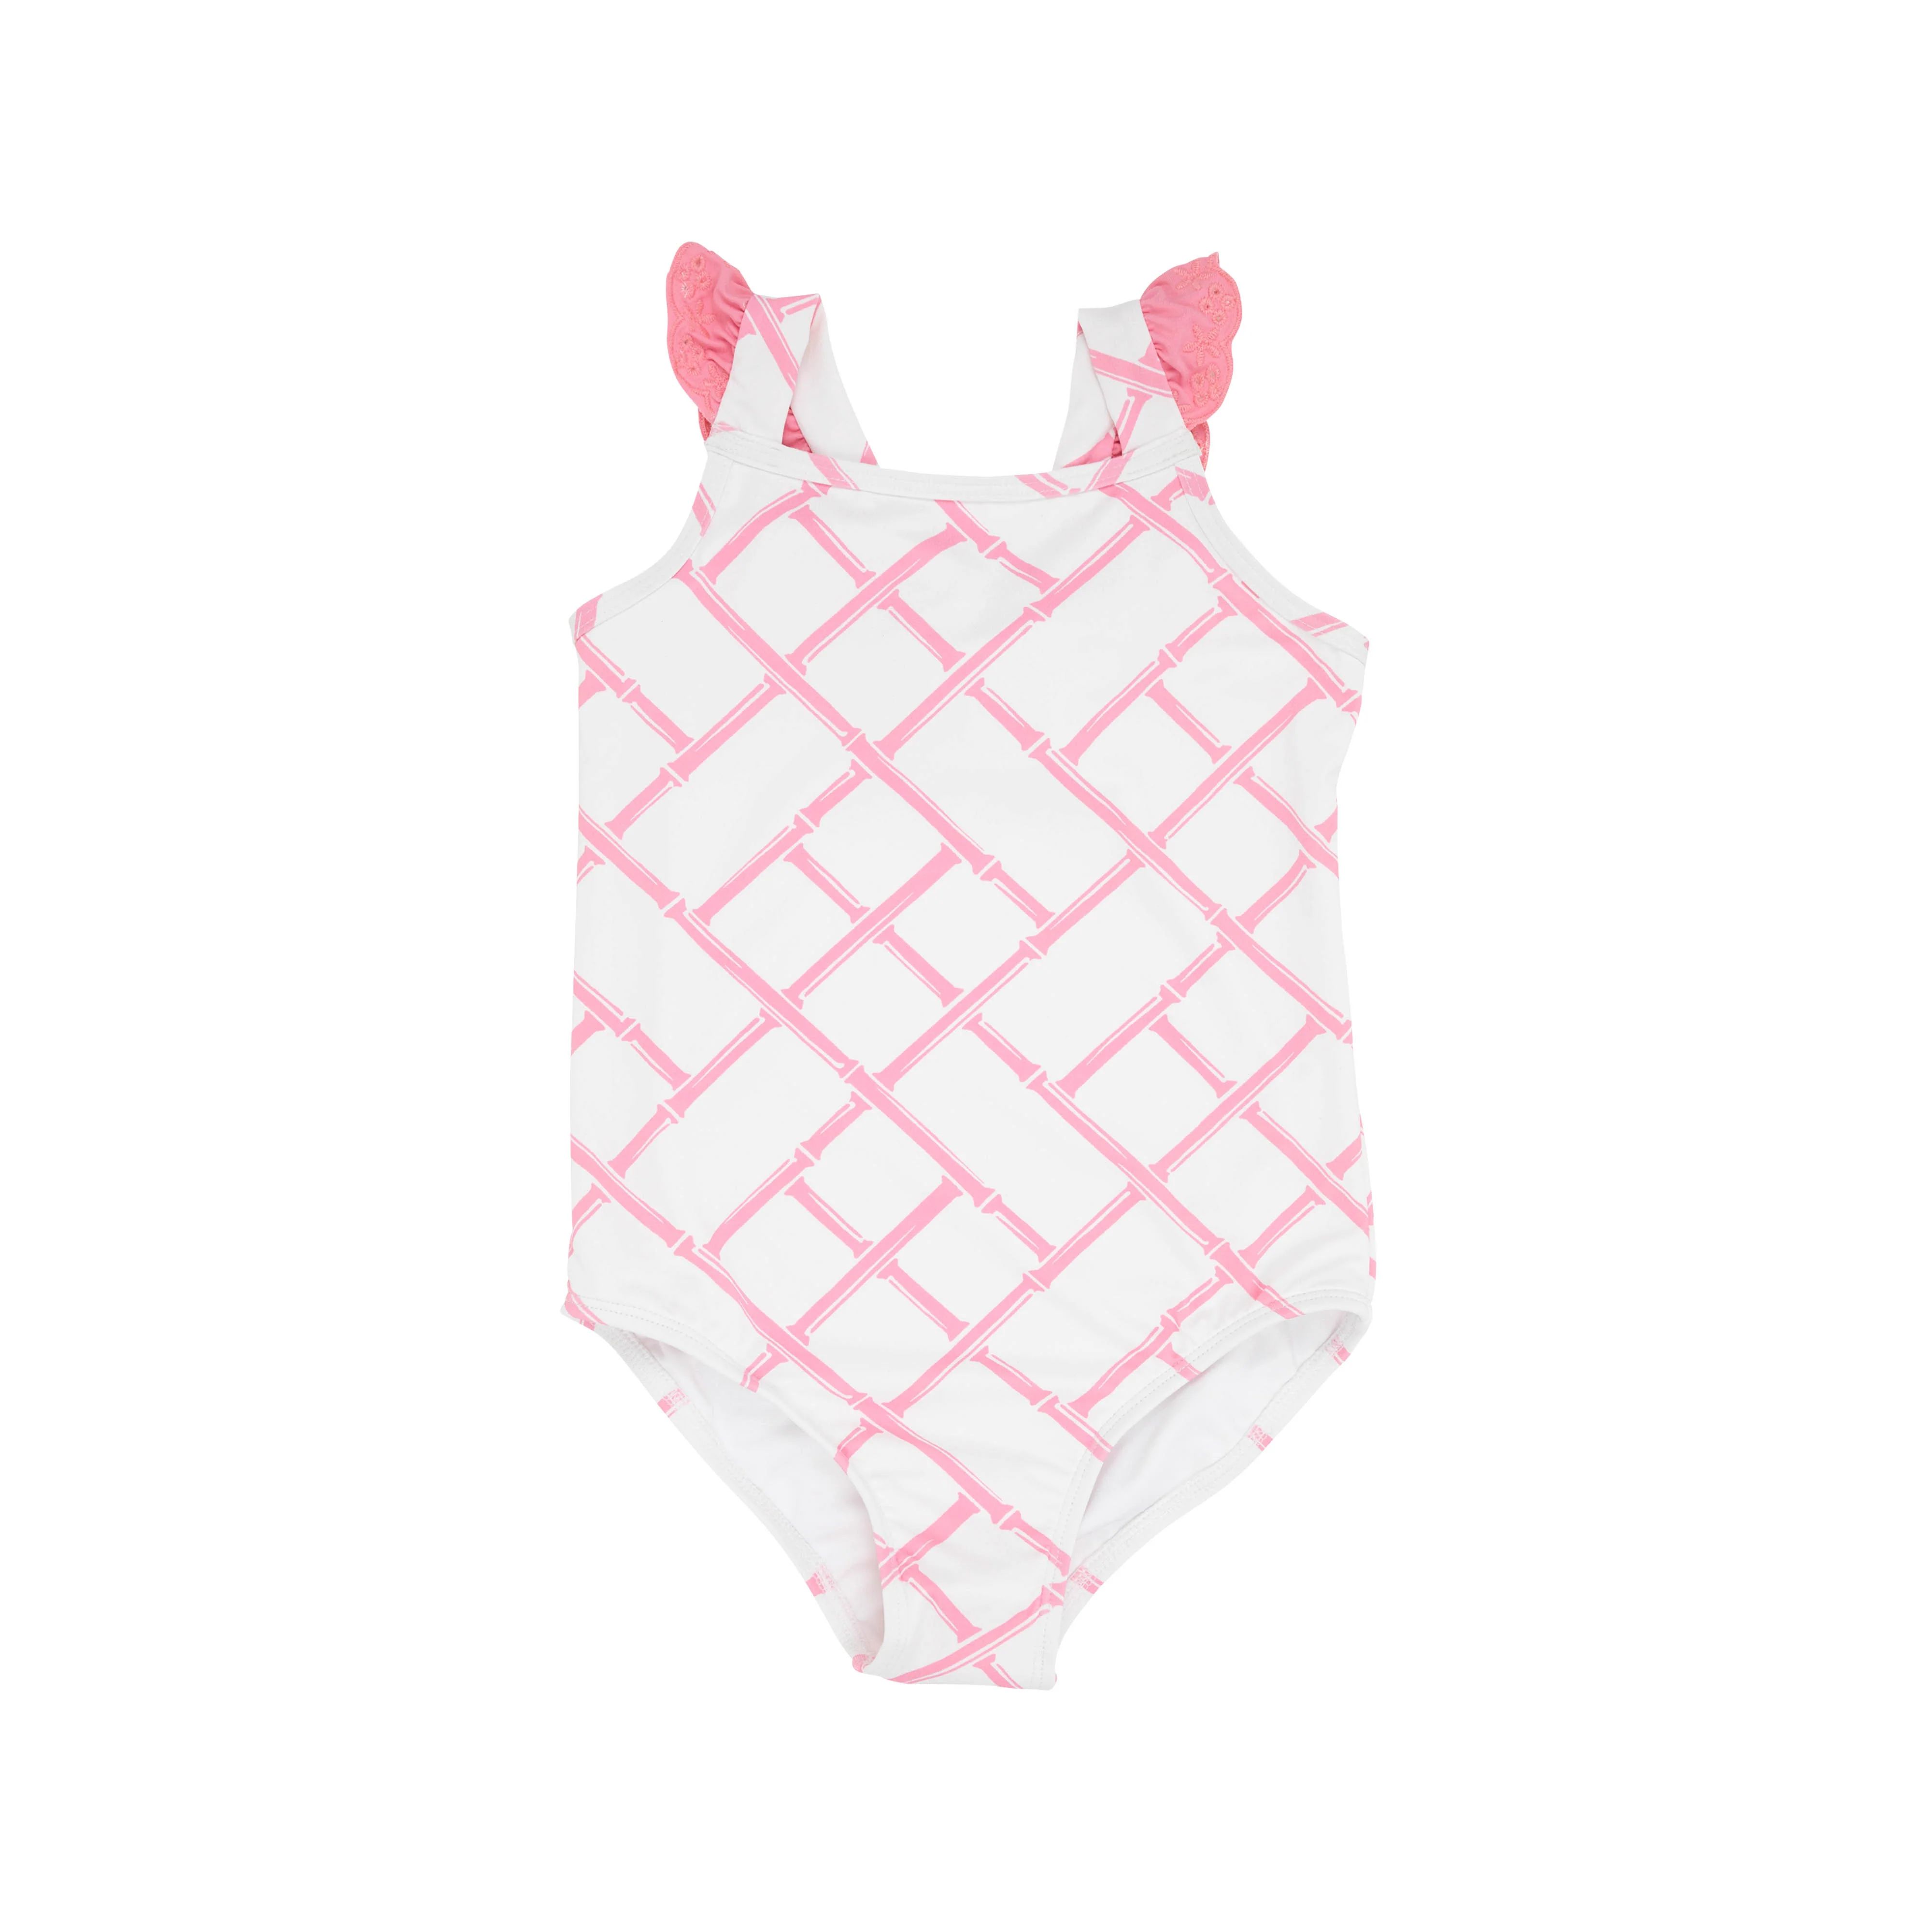 Long Bay Bathing Suit - Bamboo Proverbs with Hamptons Hot Pink | The Beaufort Bonnet Company